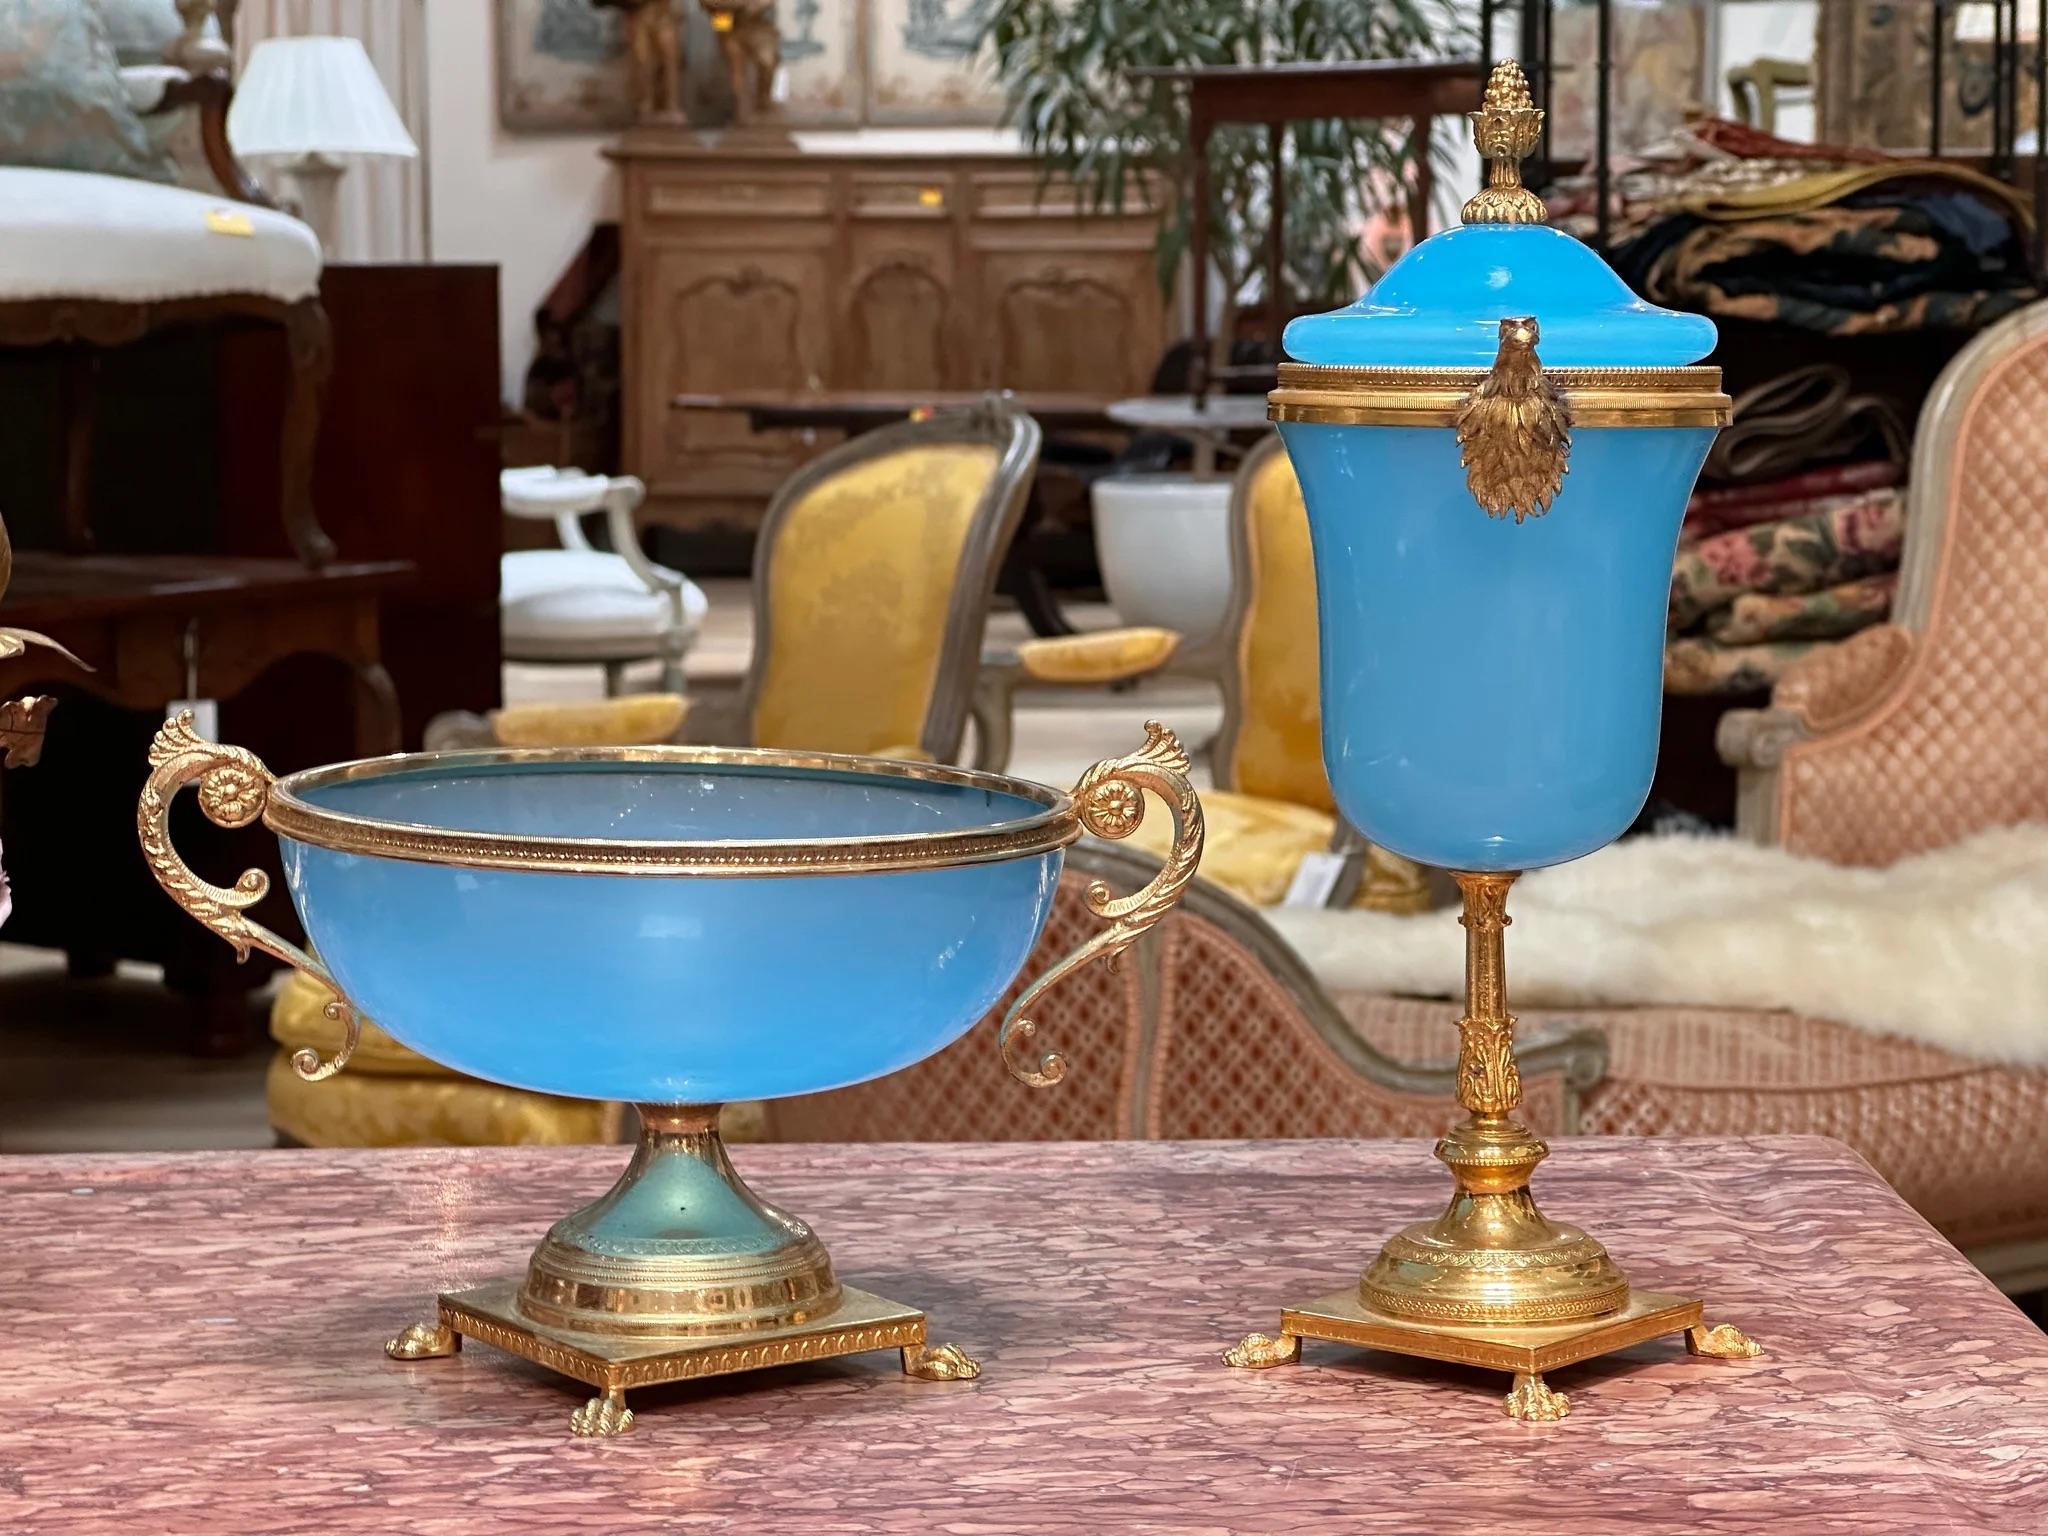 A two-piece set of French blue opaline, having dore bronze gilded accents, c. 1860, likely Palais Royale.   The urn has eagle head handles, and an acorn finial. The pedestal bowl has scrolled handles. The urn” 11 ¾” h.  x 7” w.  the bowl 5 ¼” h. x 9